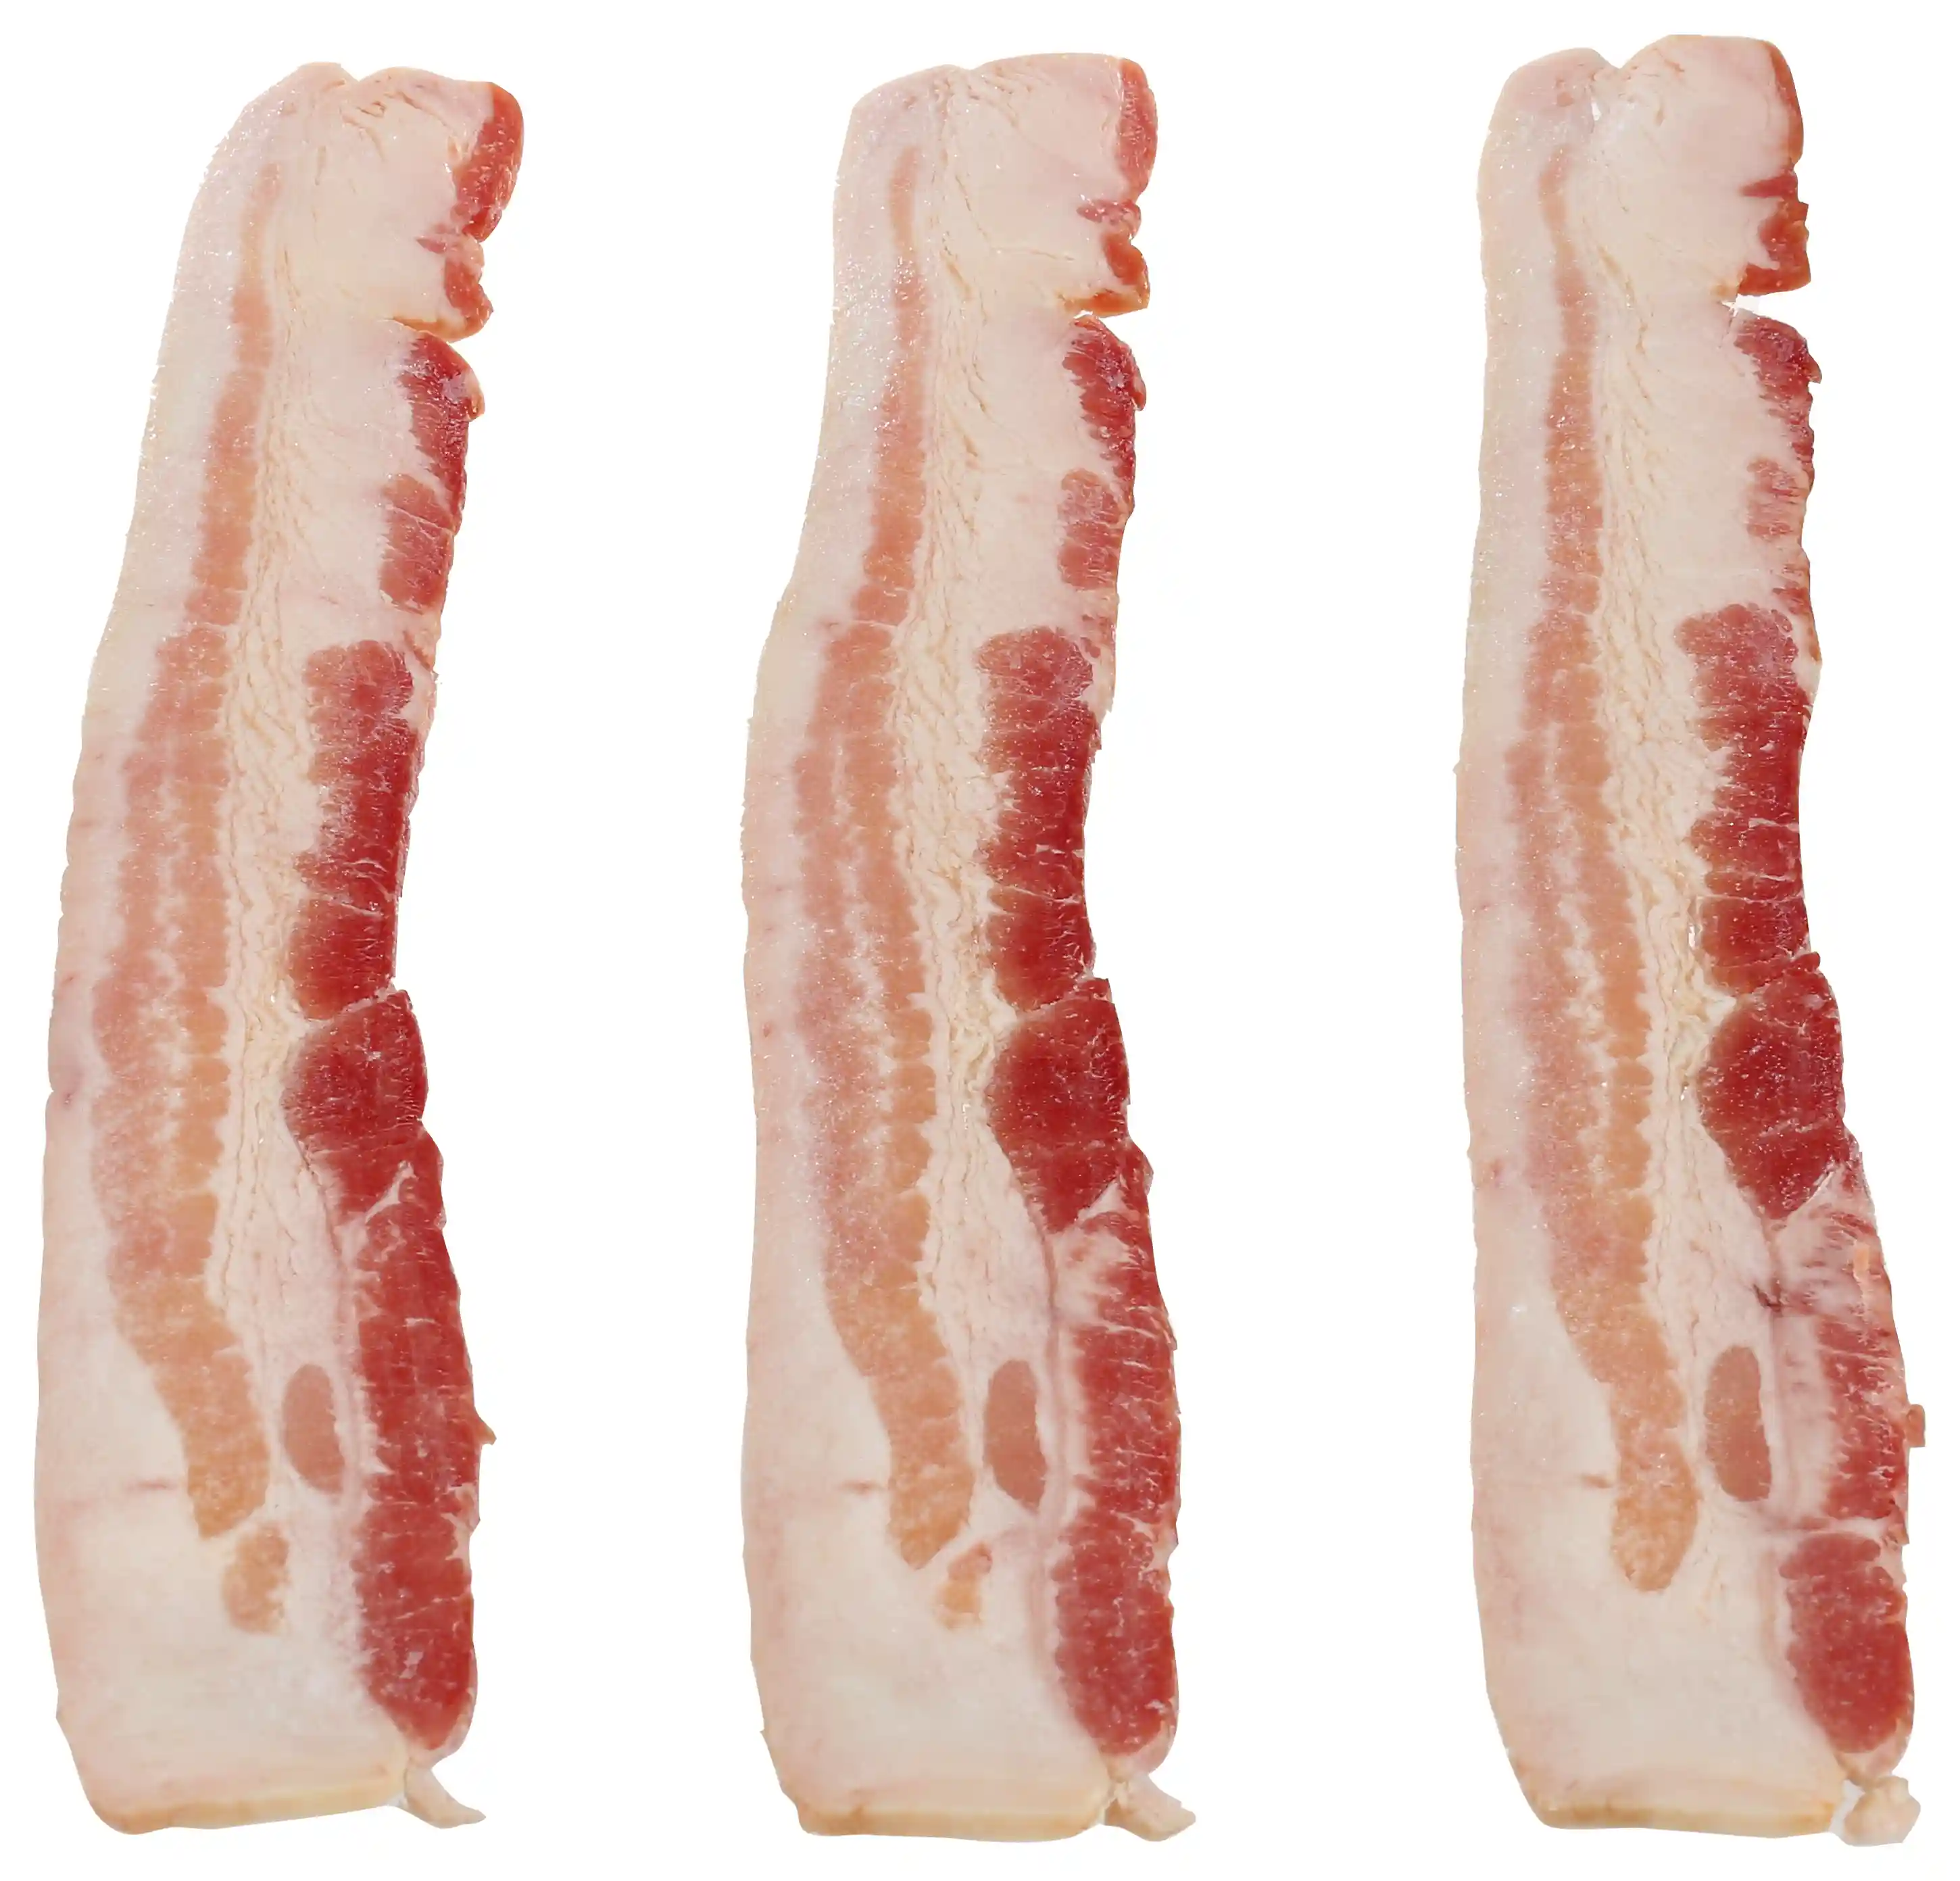 Wright® Brand Naturally Hickory Smoked Thin Sliced Bacon, Bulk, 15 Lbs, 18-22 Slices per Pound, Frozen_image_21